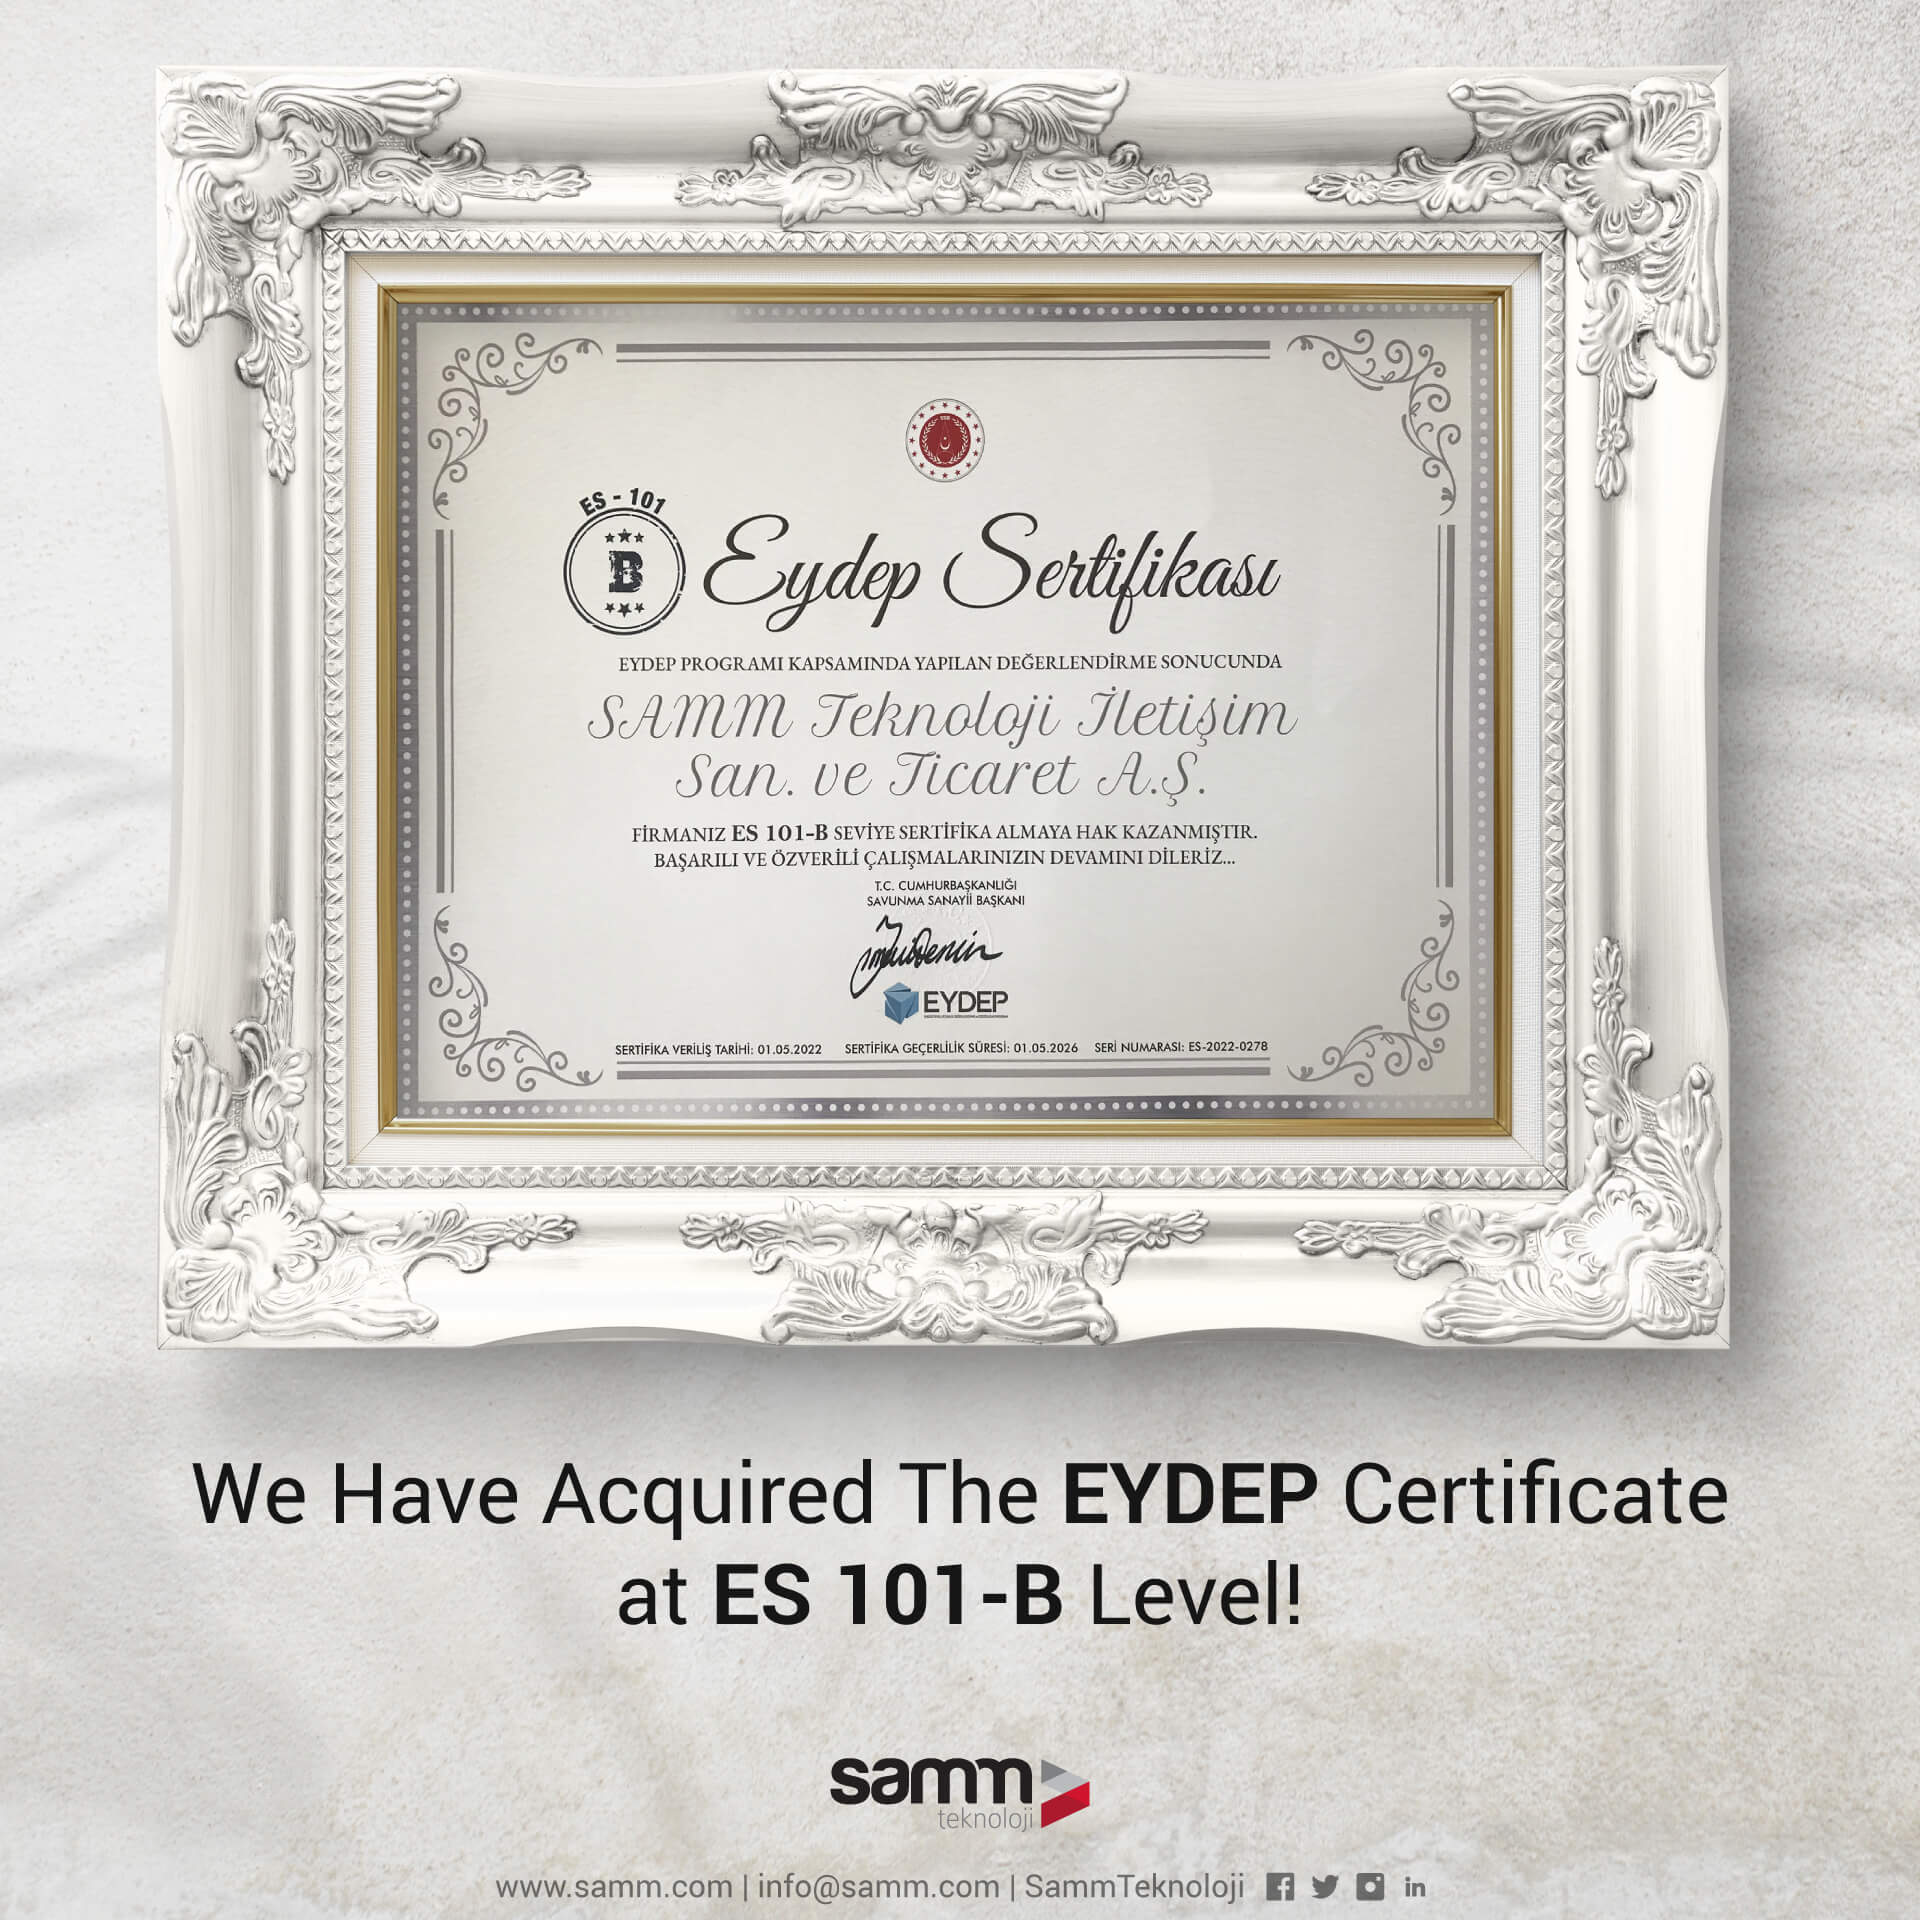 We Have Acquired The EYDEP Certificate at ES 101-B Level!